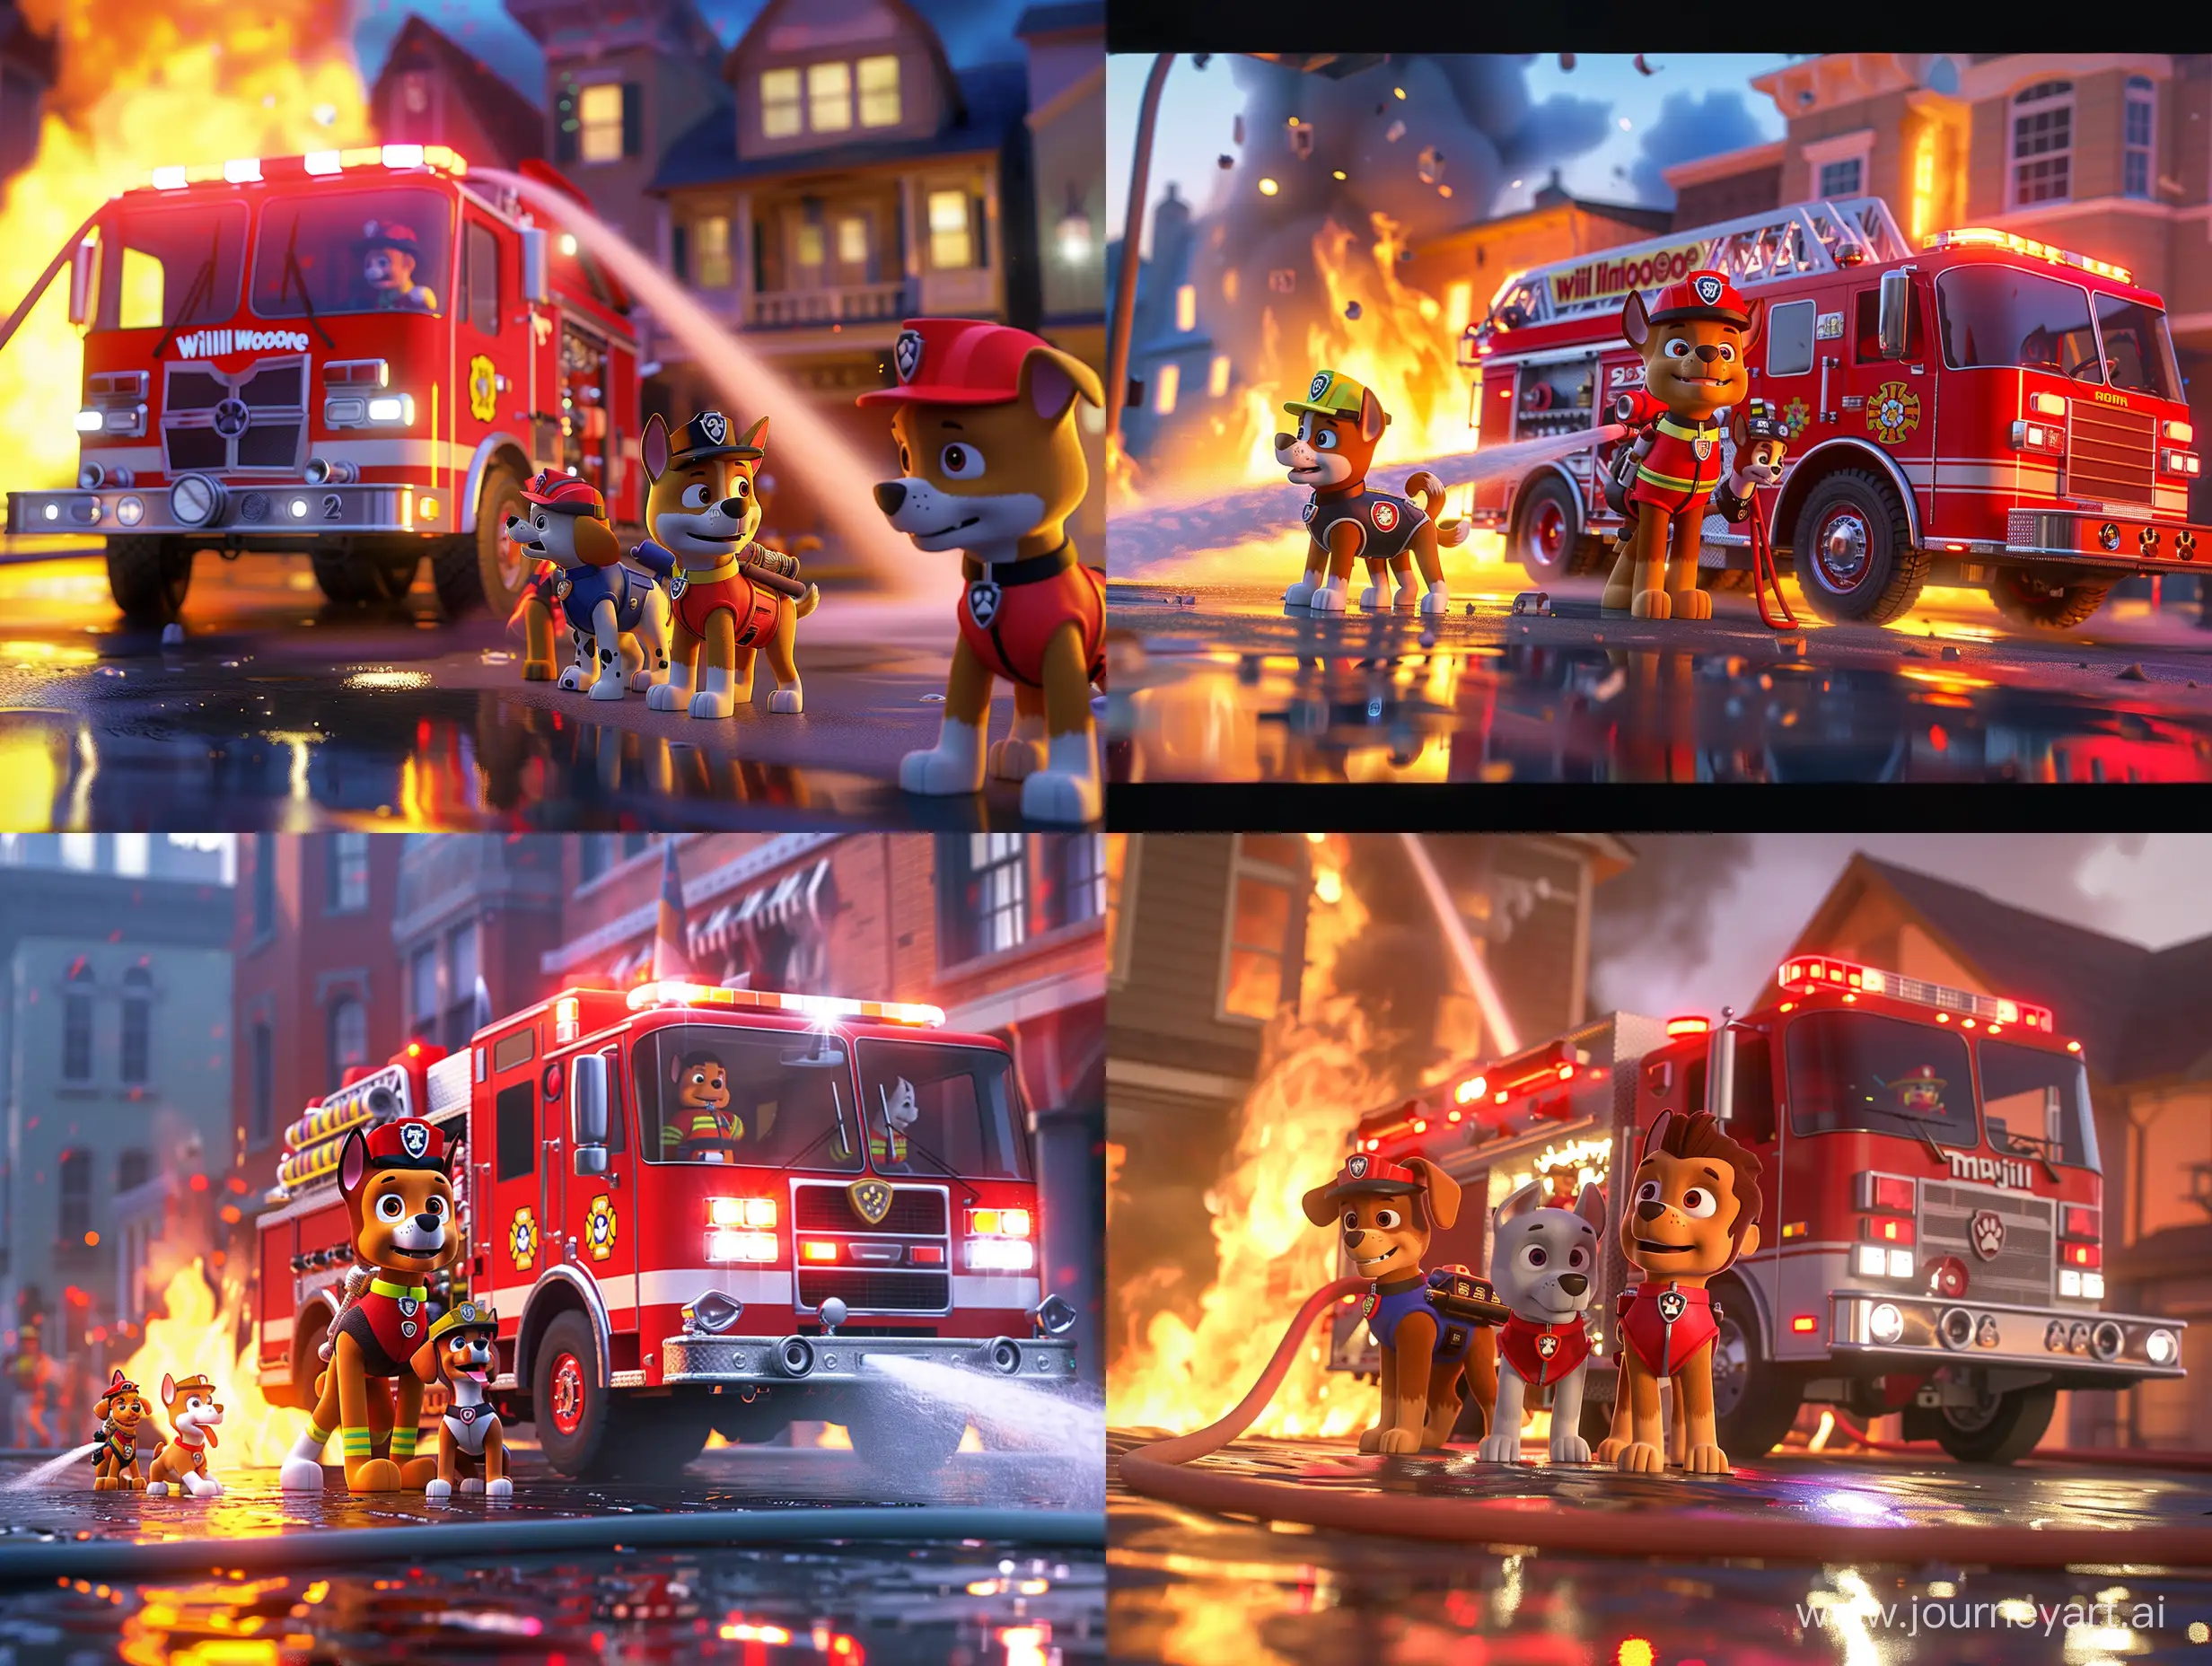 Realistic-William-Watermore-Fire-Truck-Putting-Out-Building-Fire-with-PAW-Patrol-Dogs